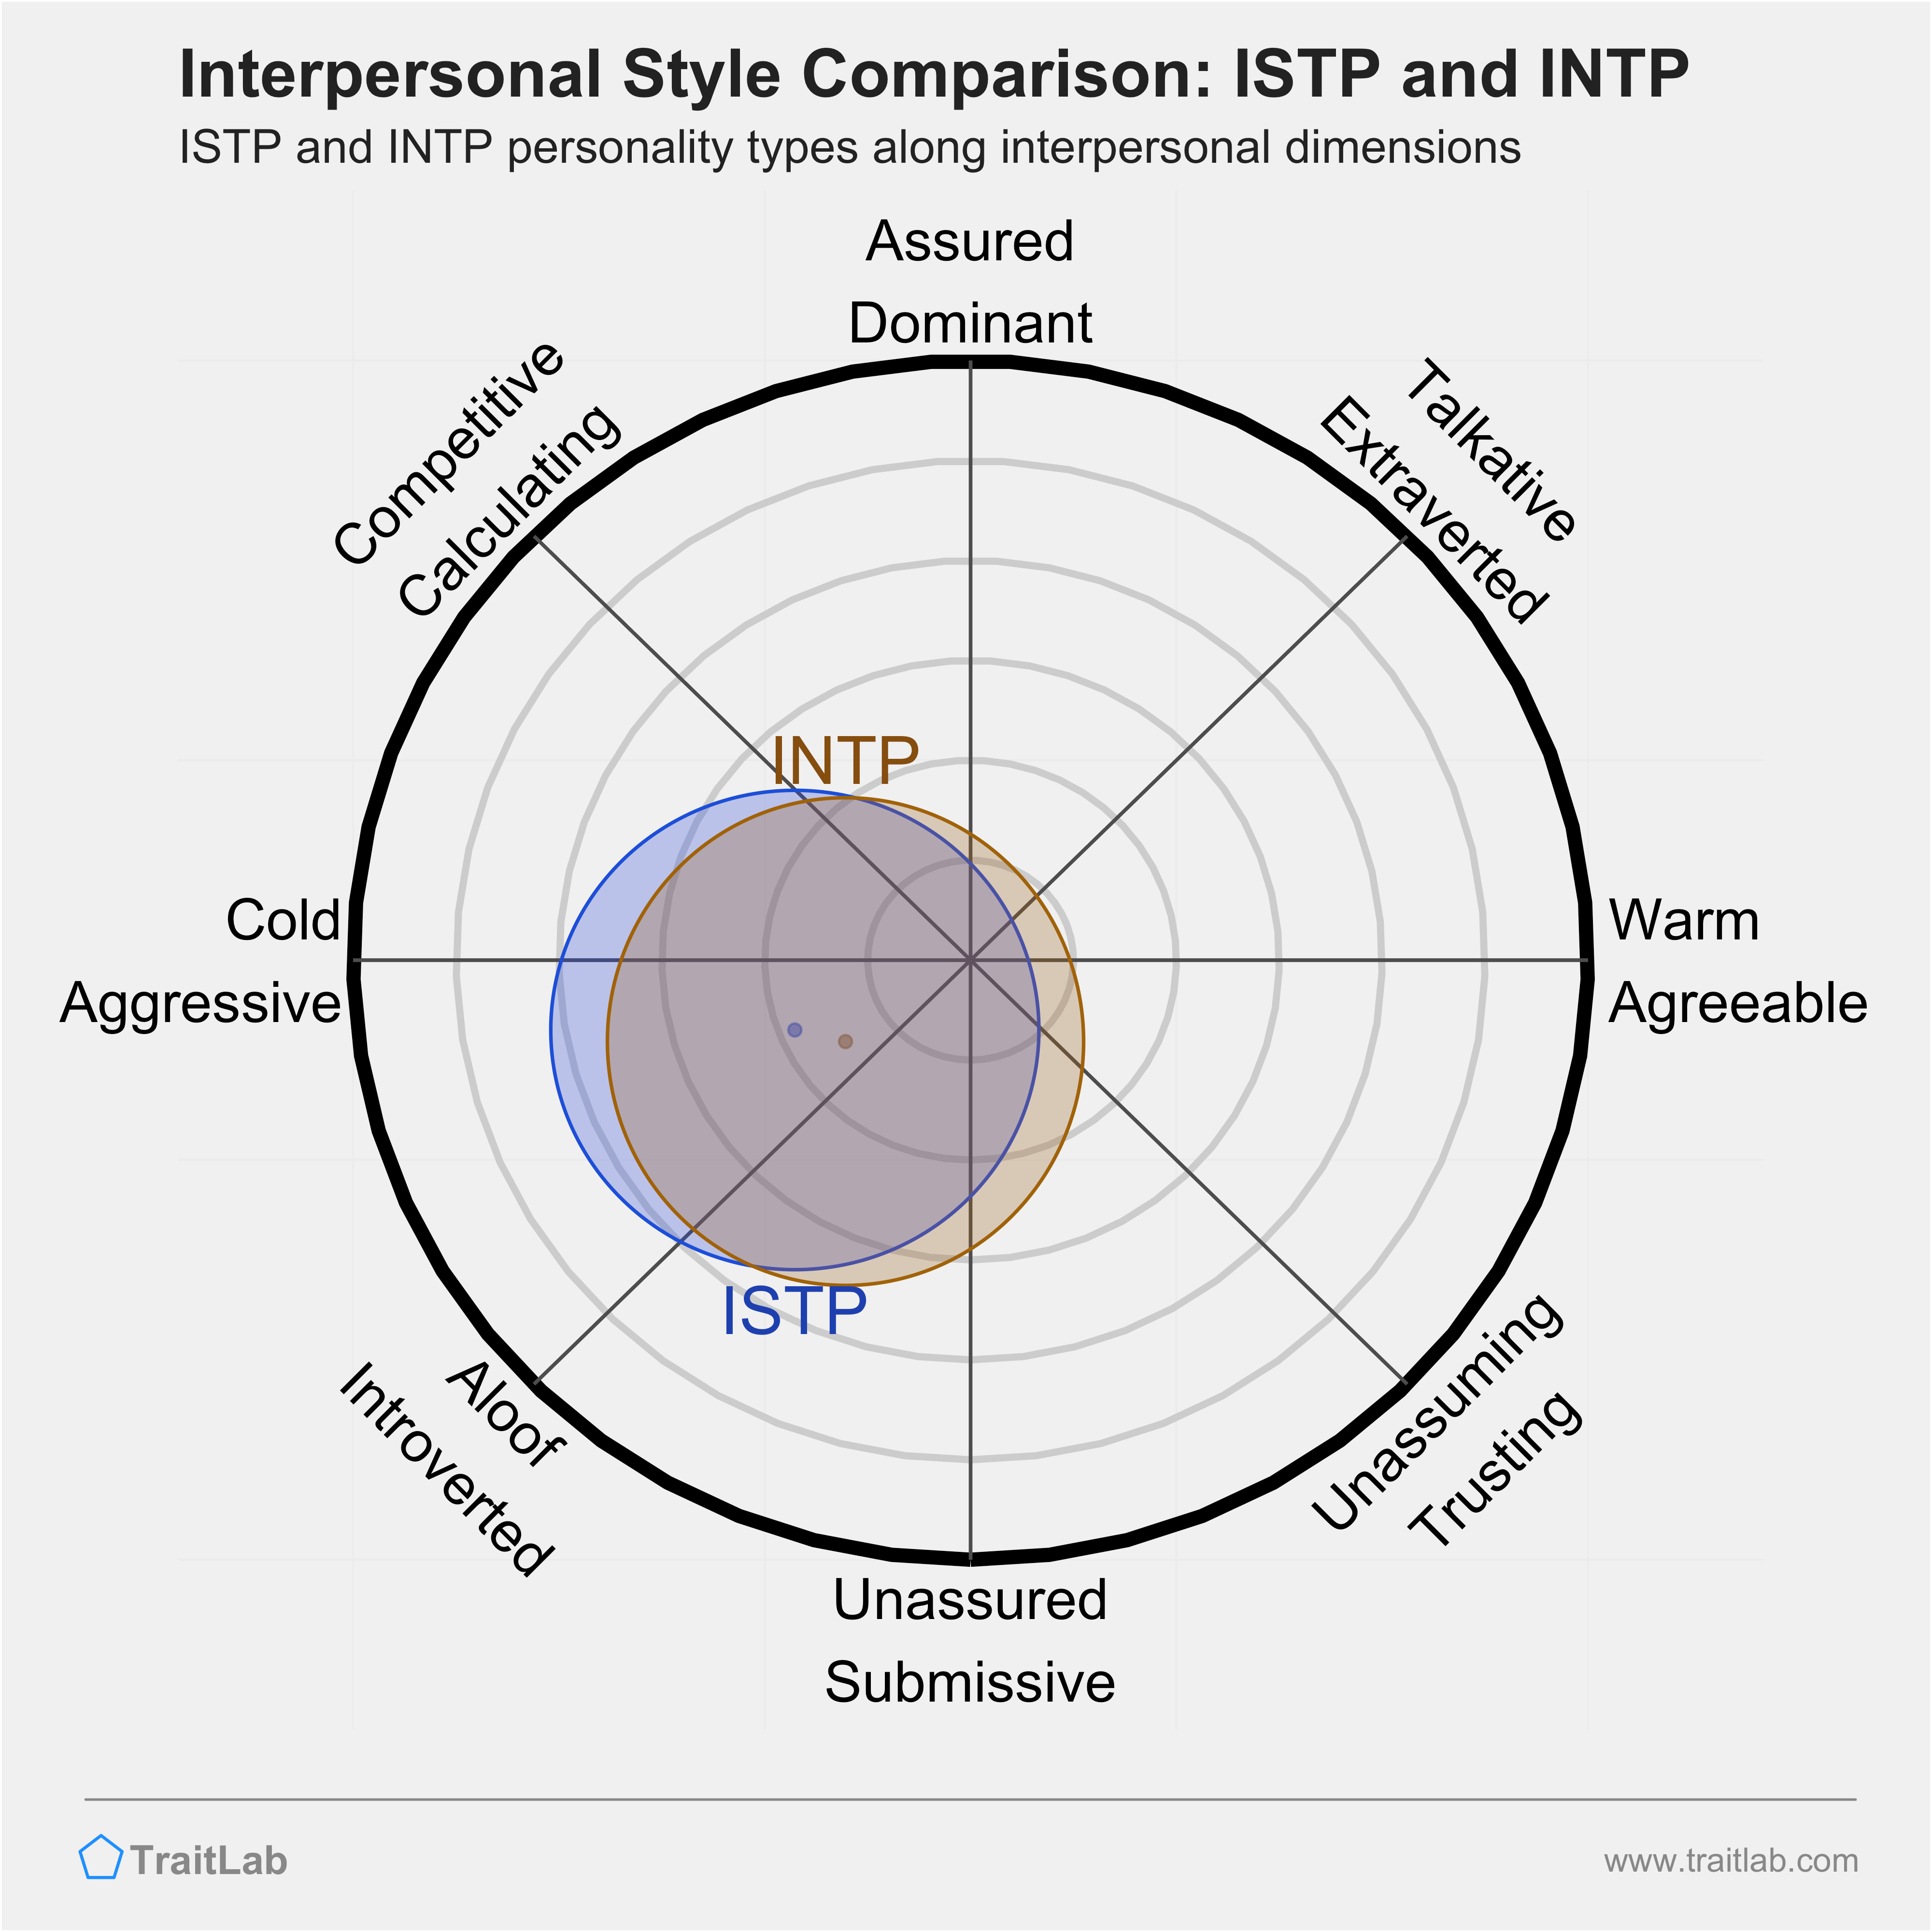 ISTP and INTP comparison across interpersonal dimensions